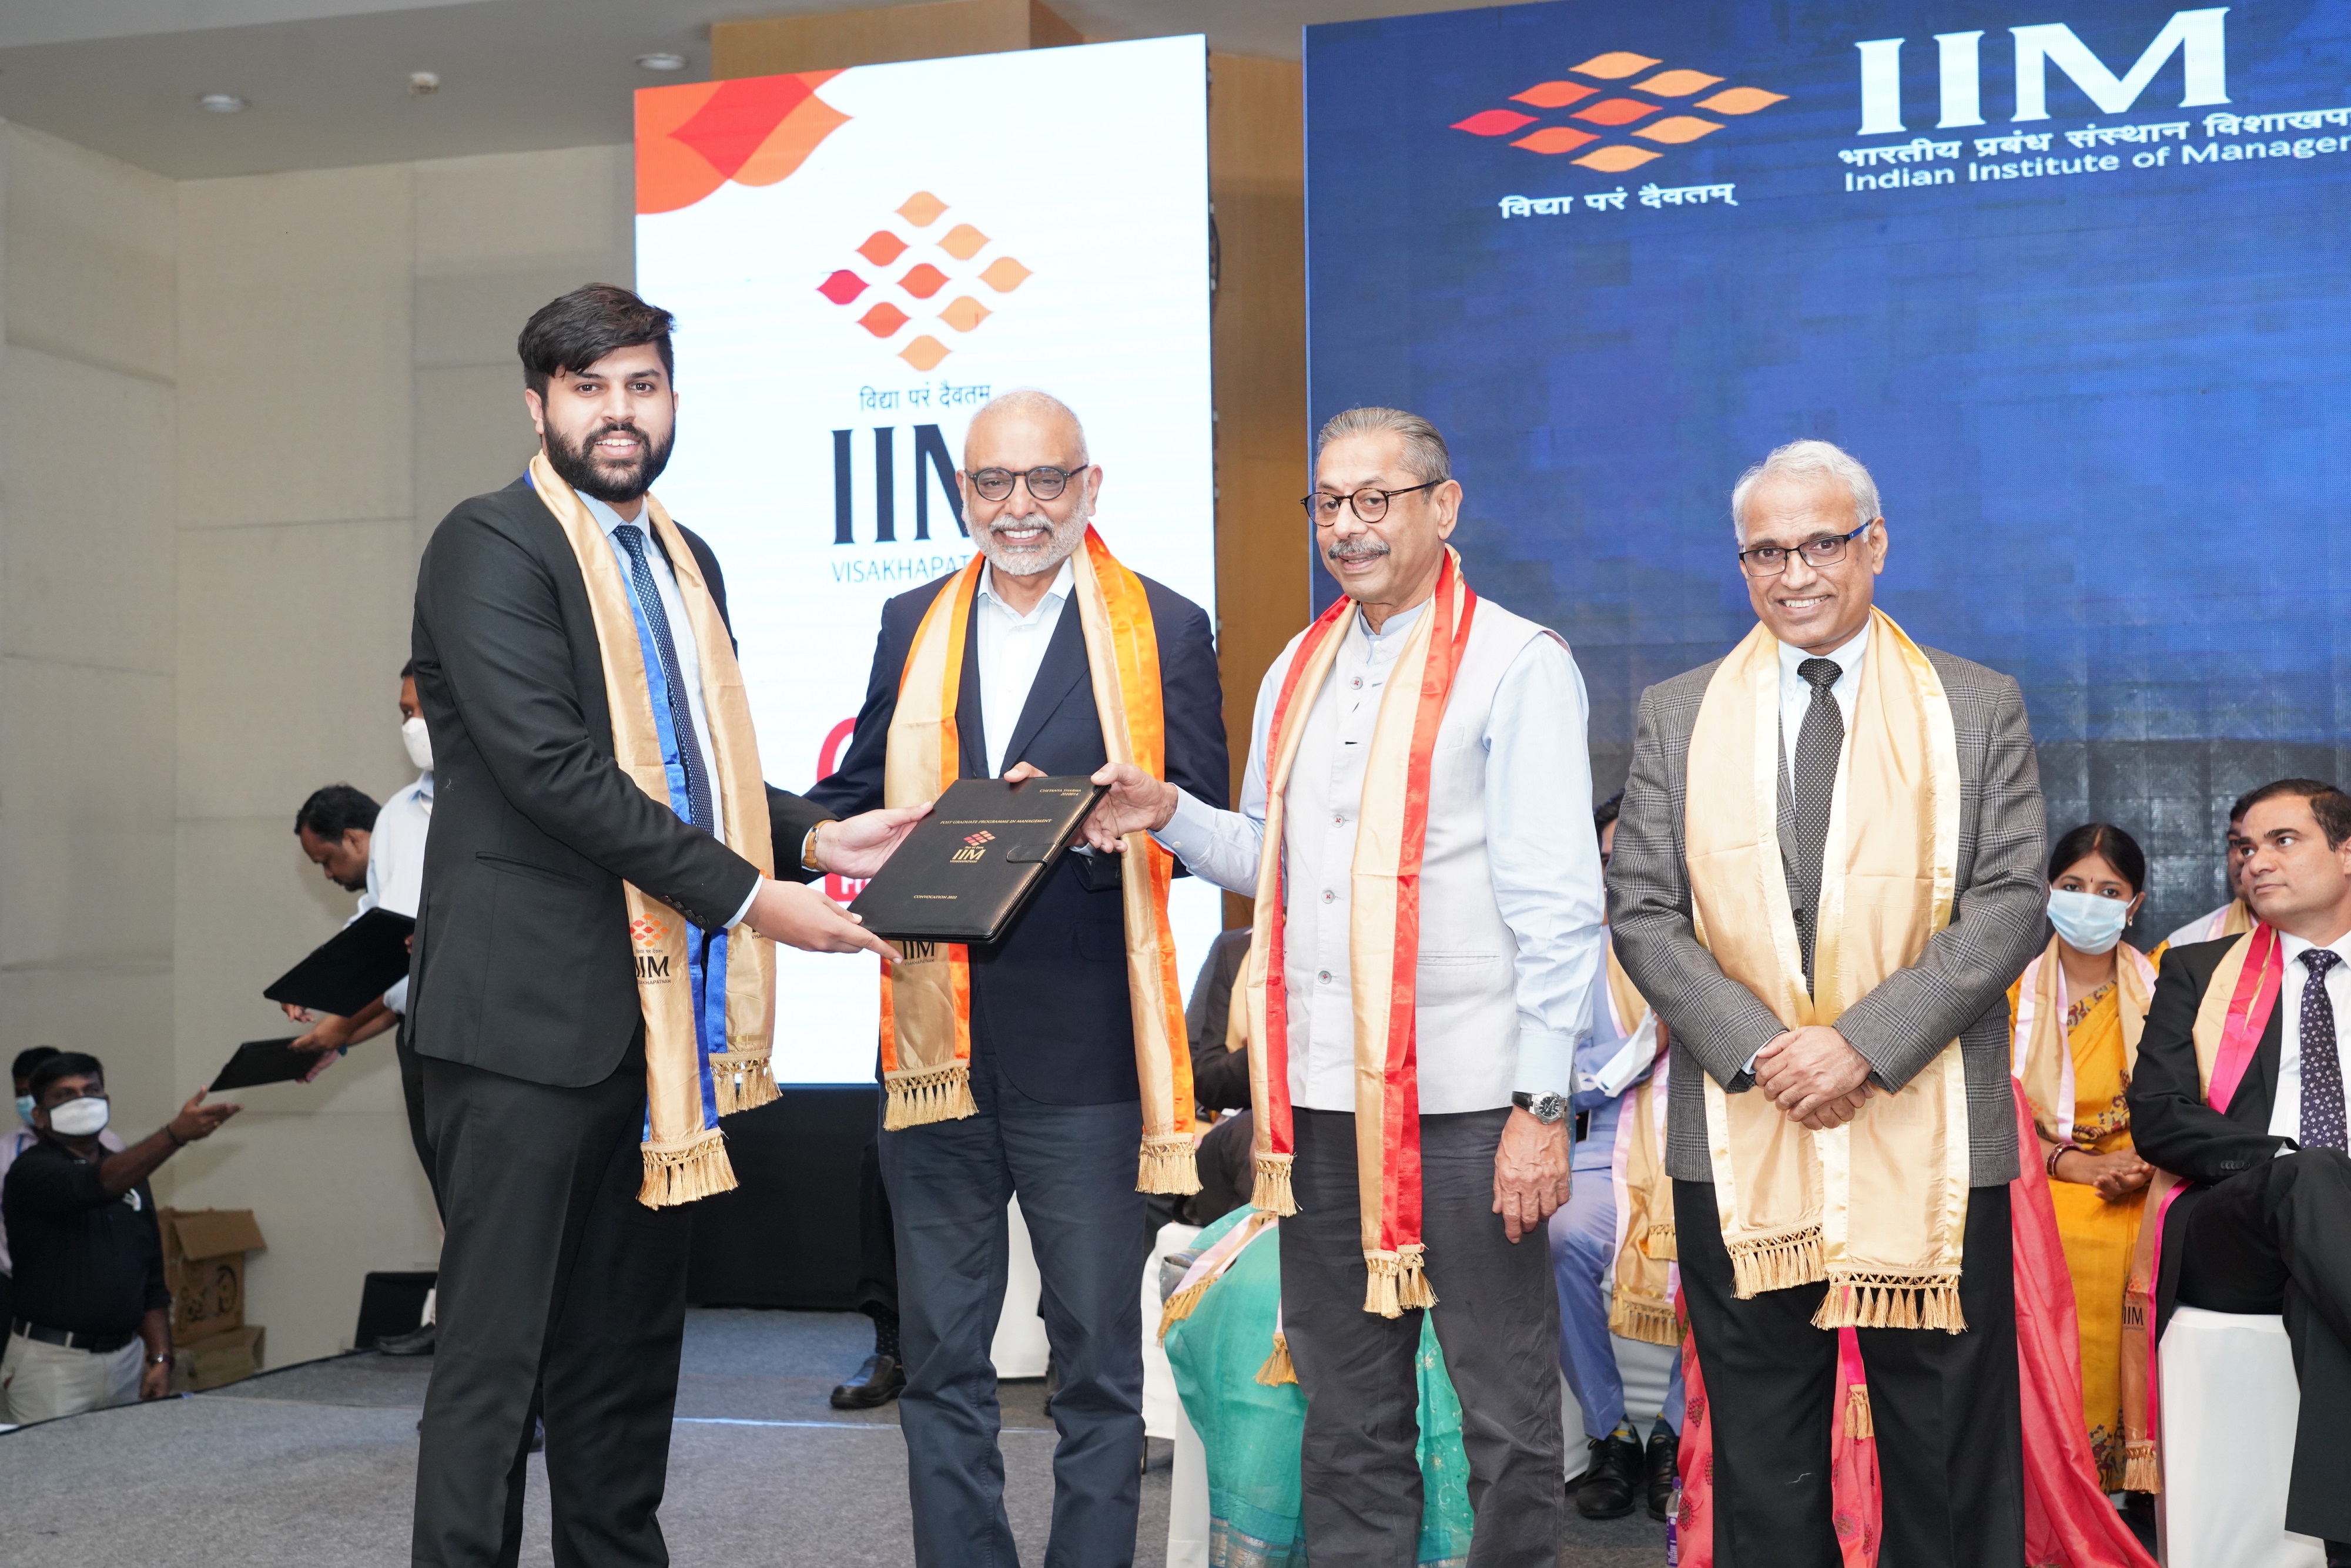 IIMV hosts its 6th Annual Convocation - 29.07.2022